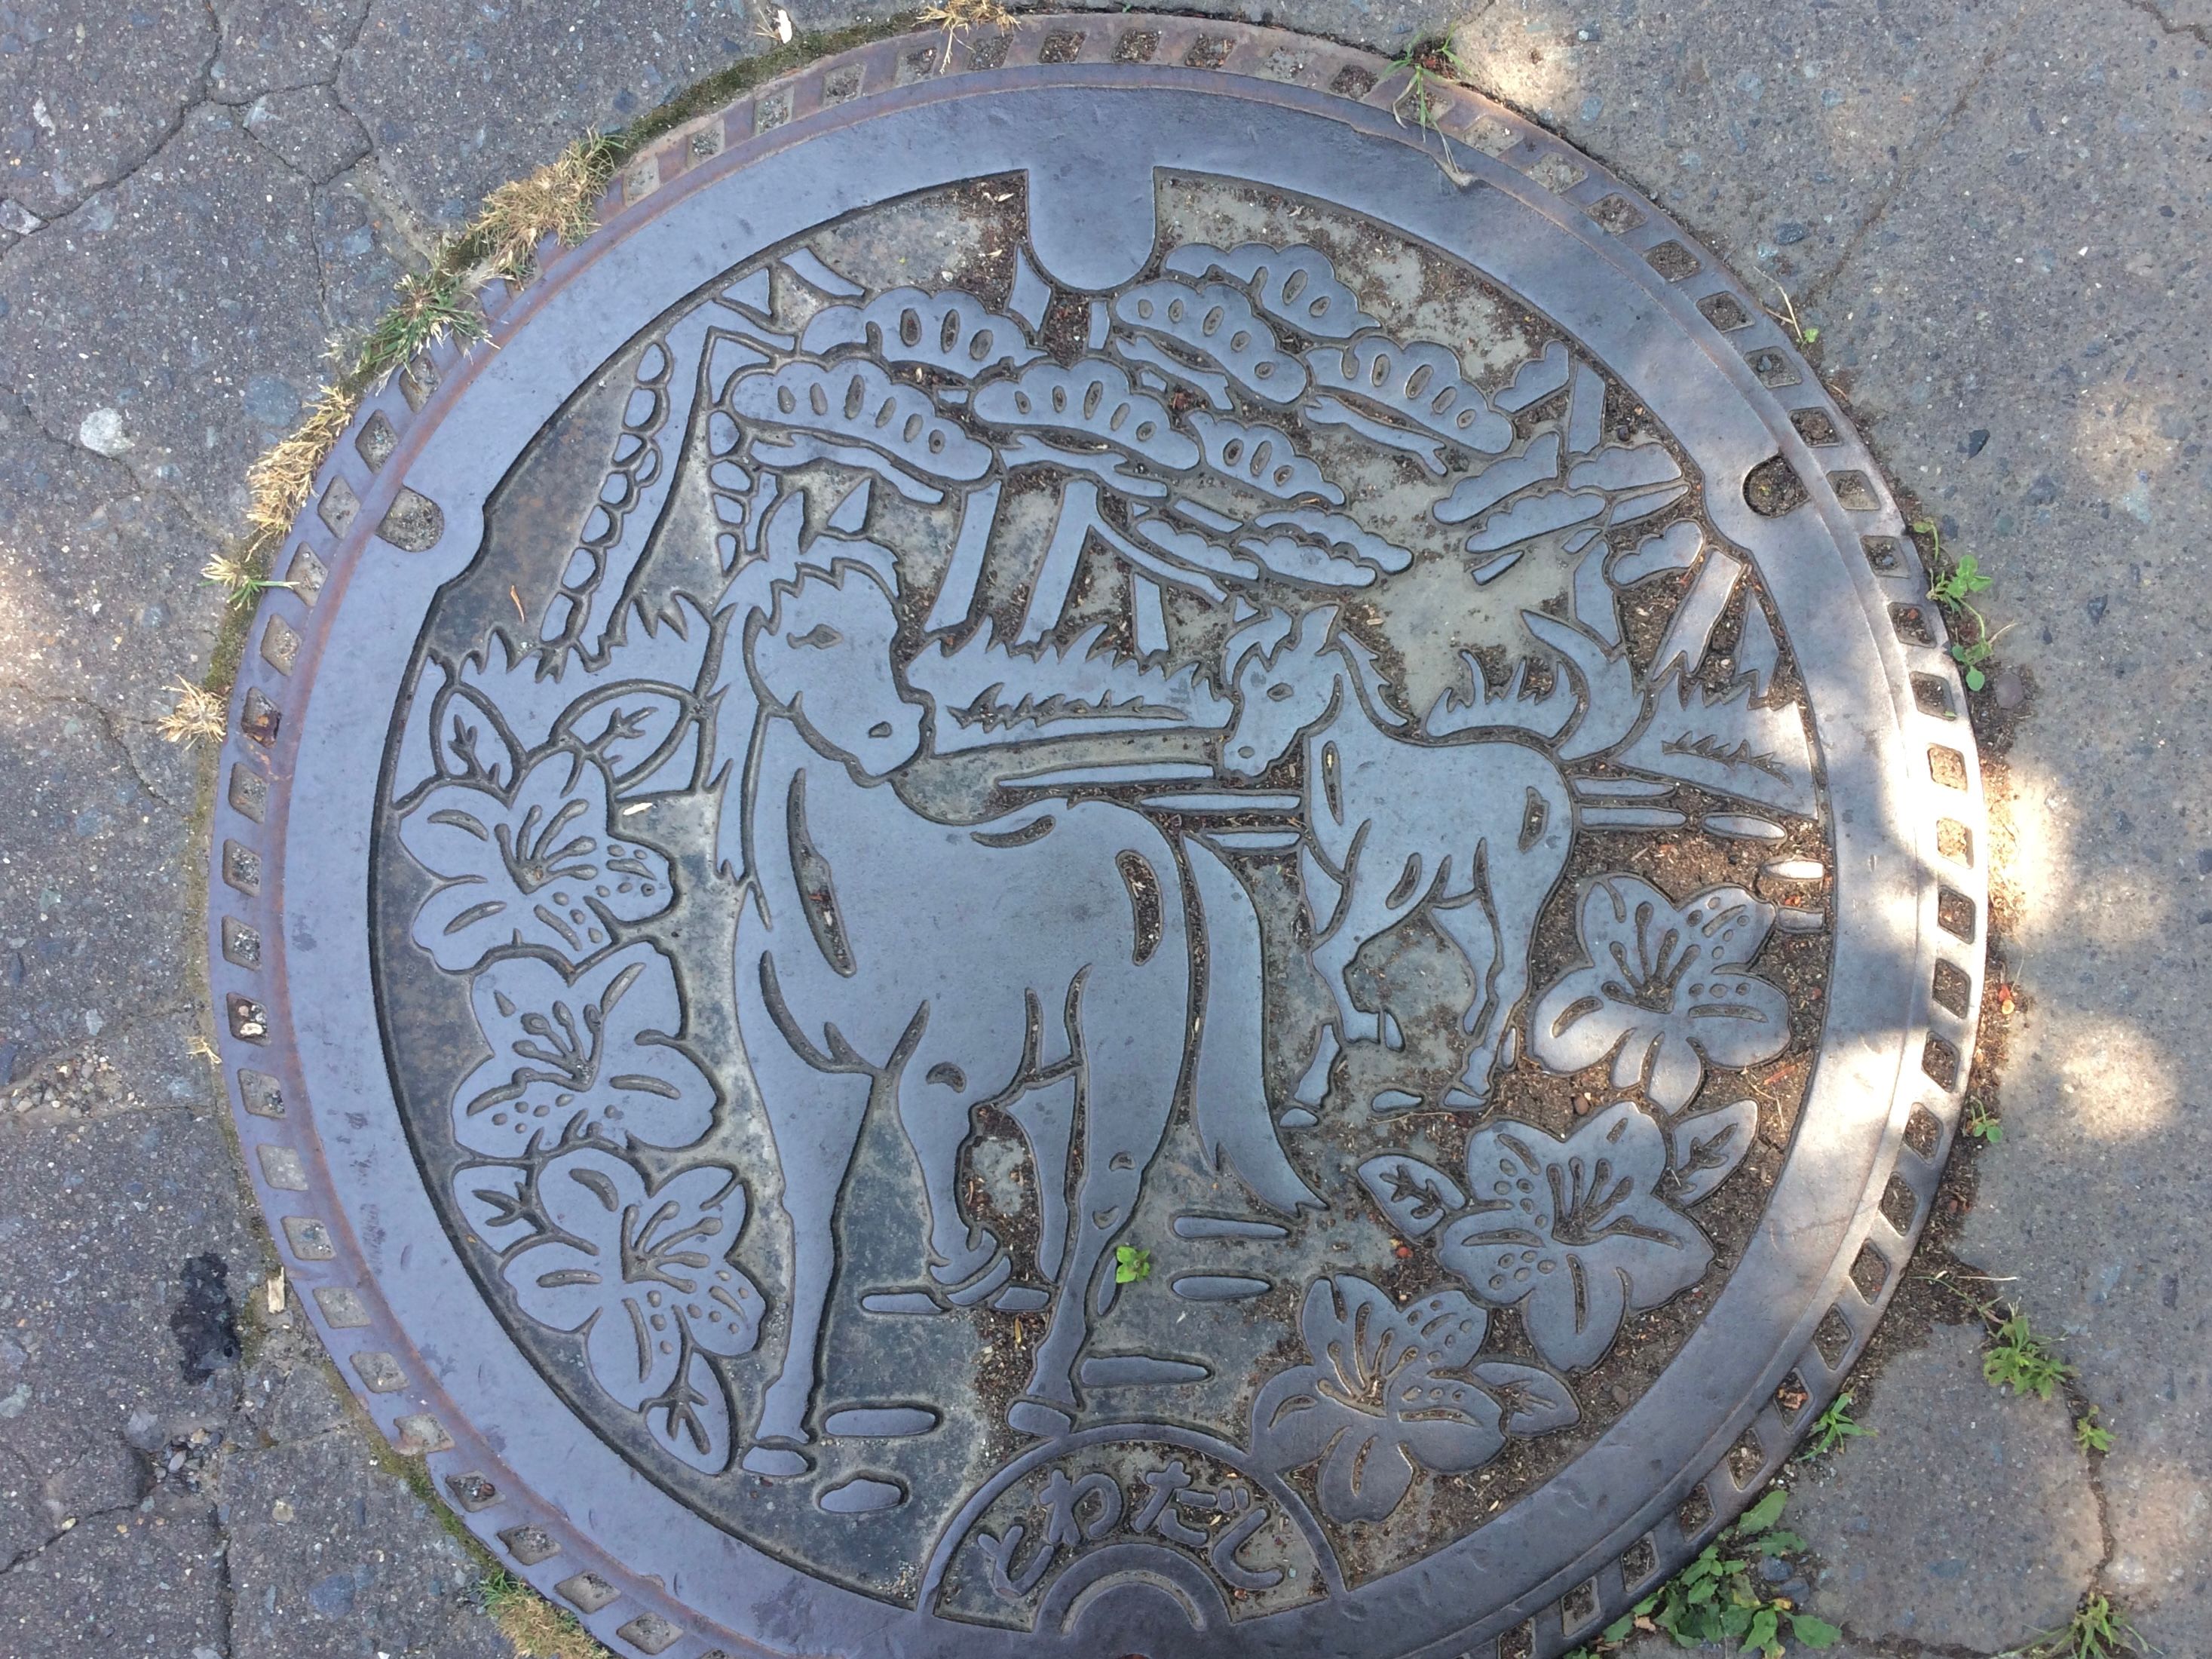 A manhole cover shows two very beautiful horses.